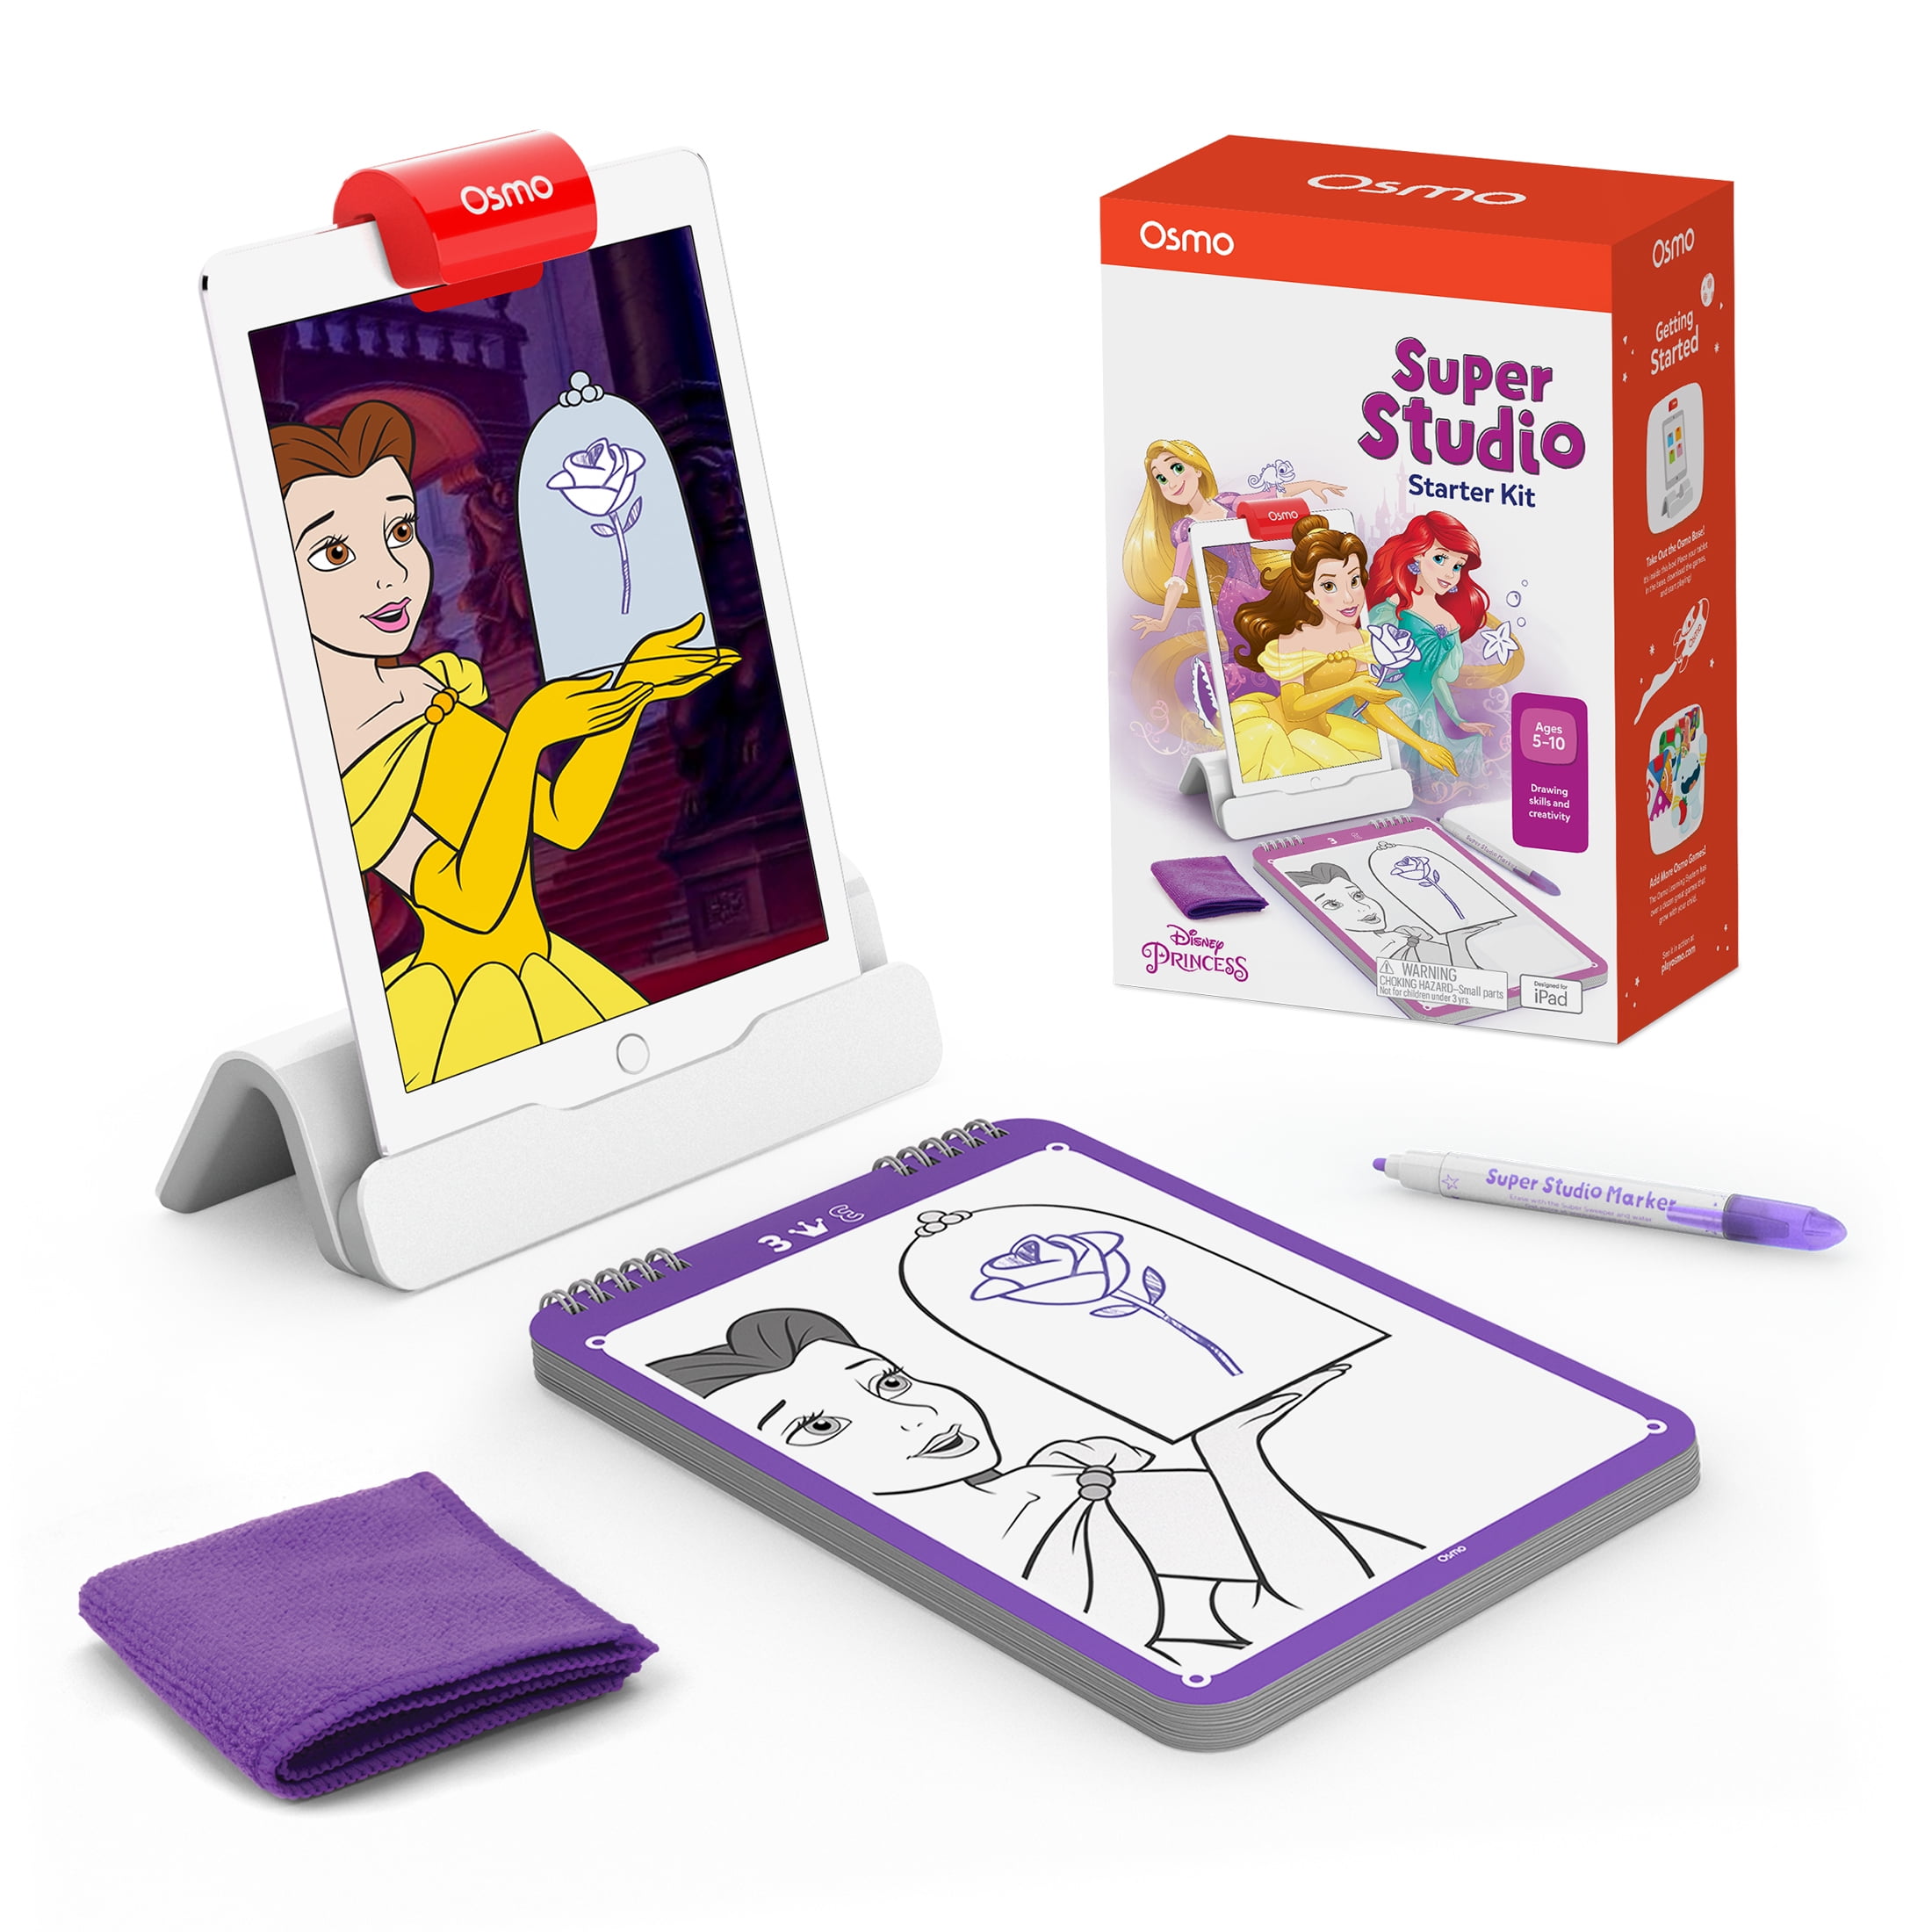 Osmo Super Studio Disney Frozen II Drawing Game for iPad or Fire Tablet 